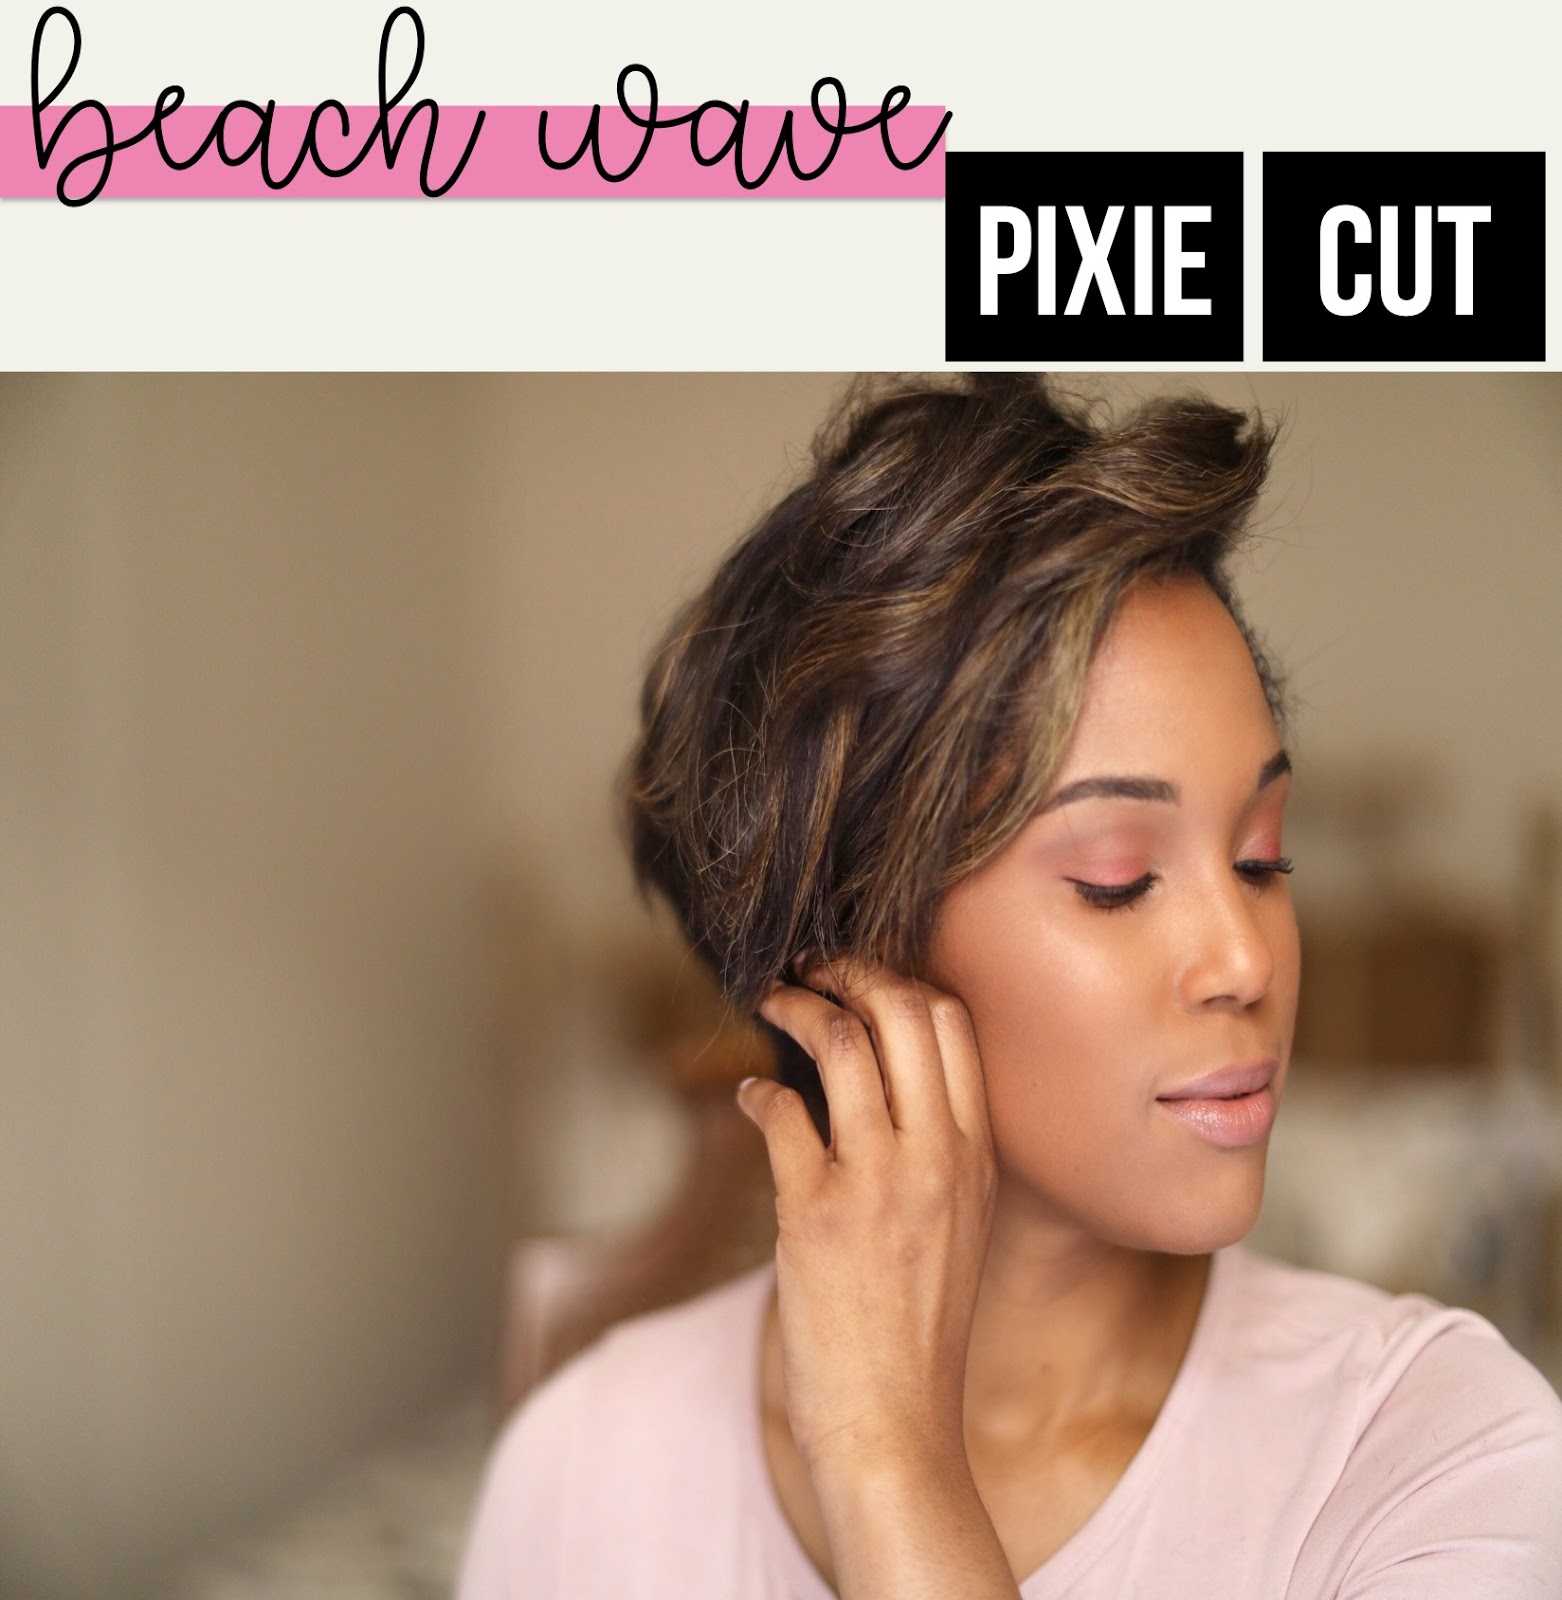 Curling my growing pixie using a Paul Mitchell Flat Iron | I'm Jade Stenger